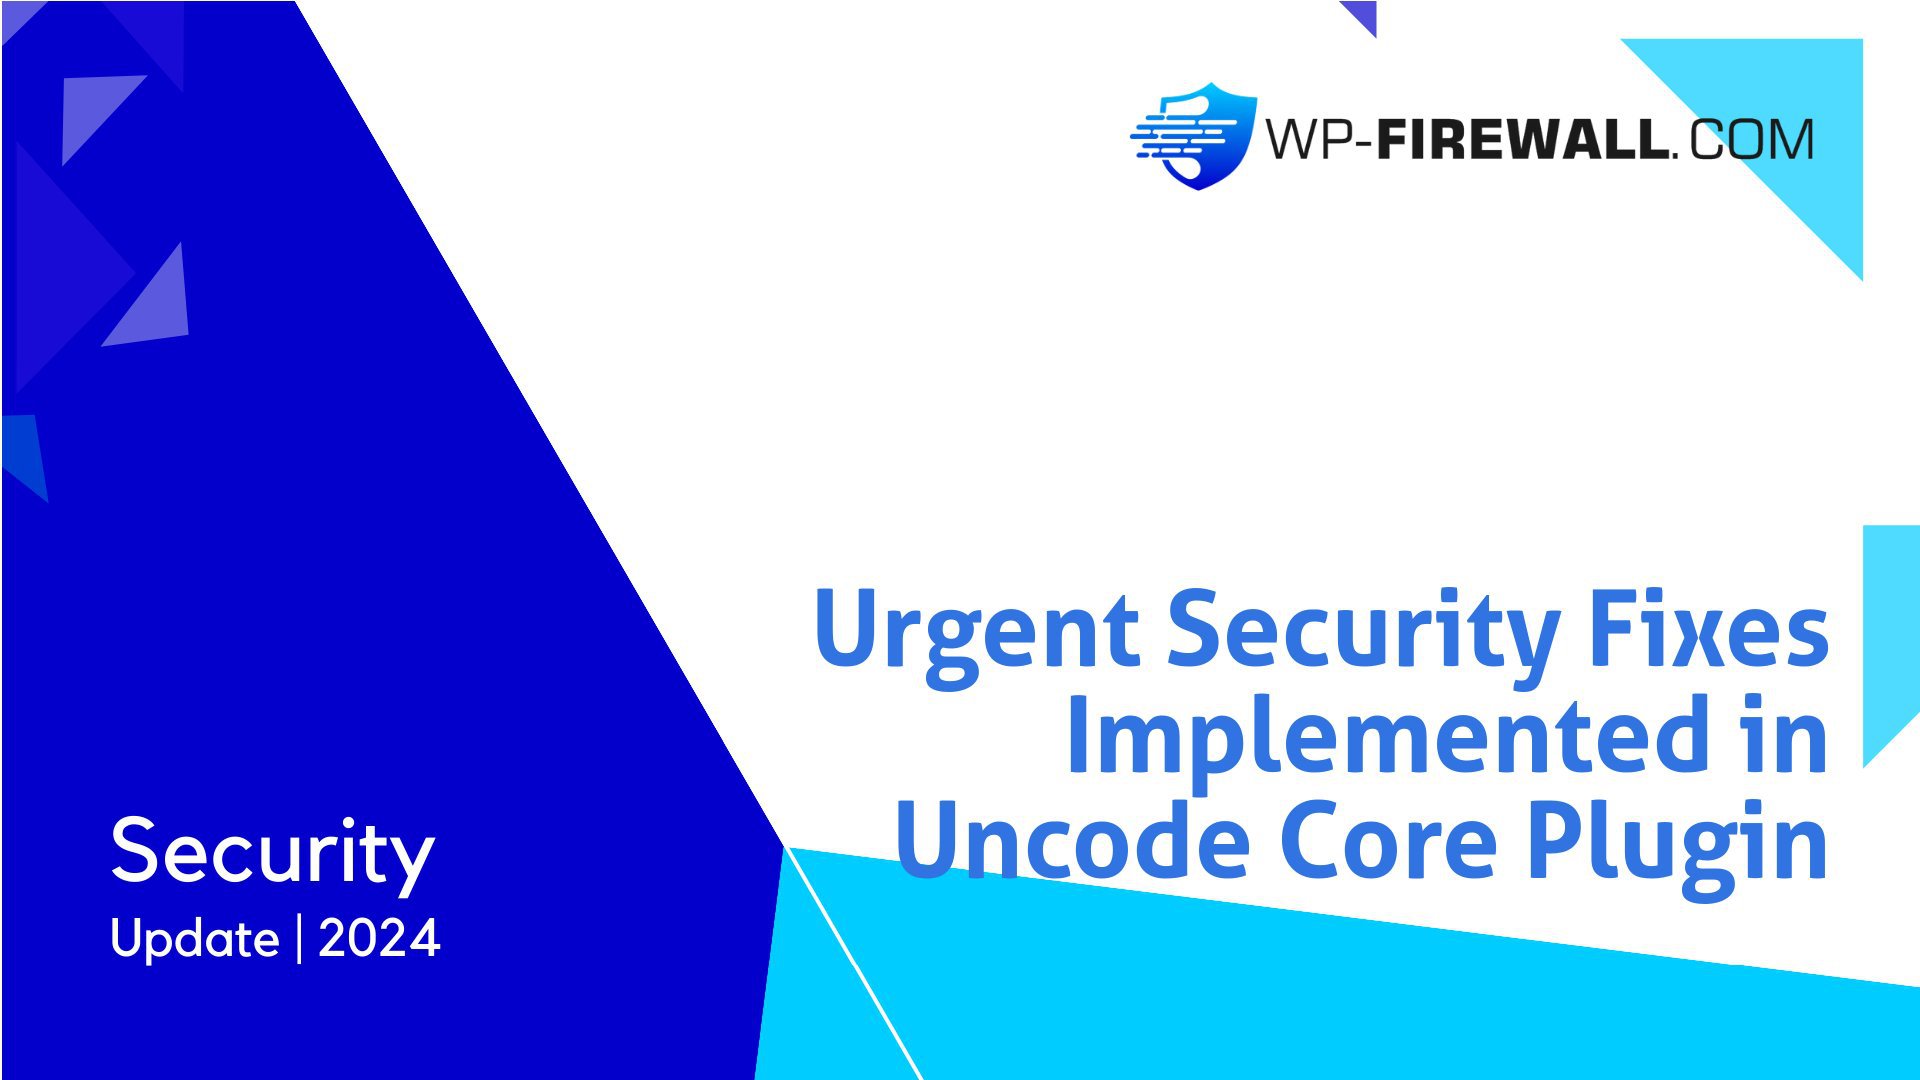 High Priority Vulnerabilities Patched in Uncode Core Plugin cover